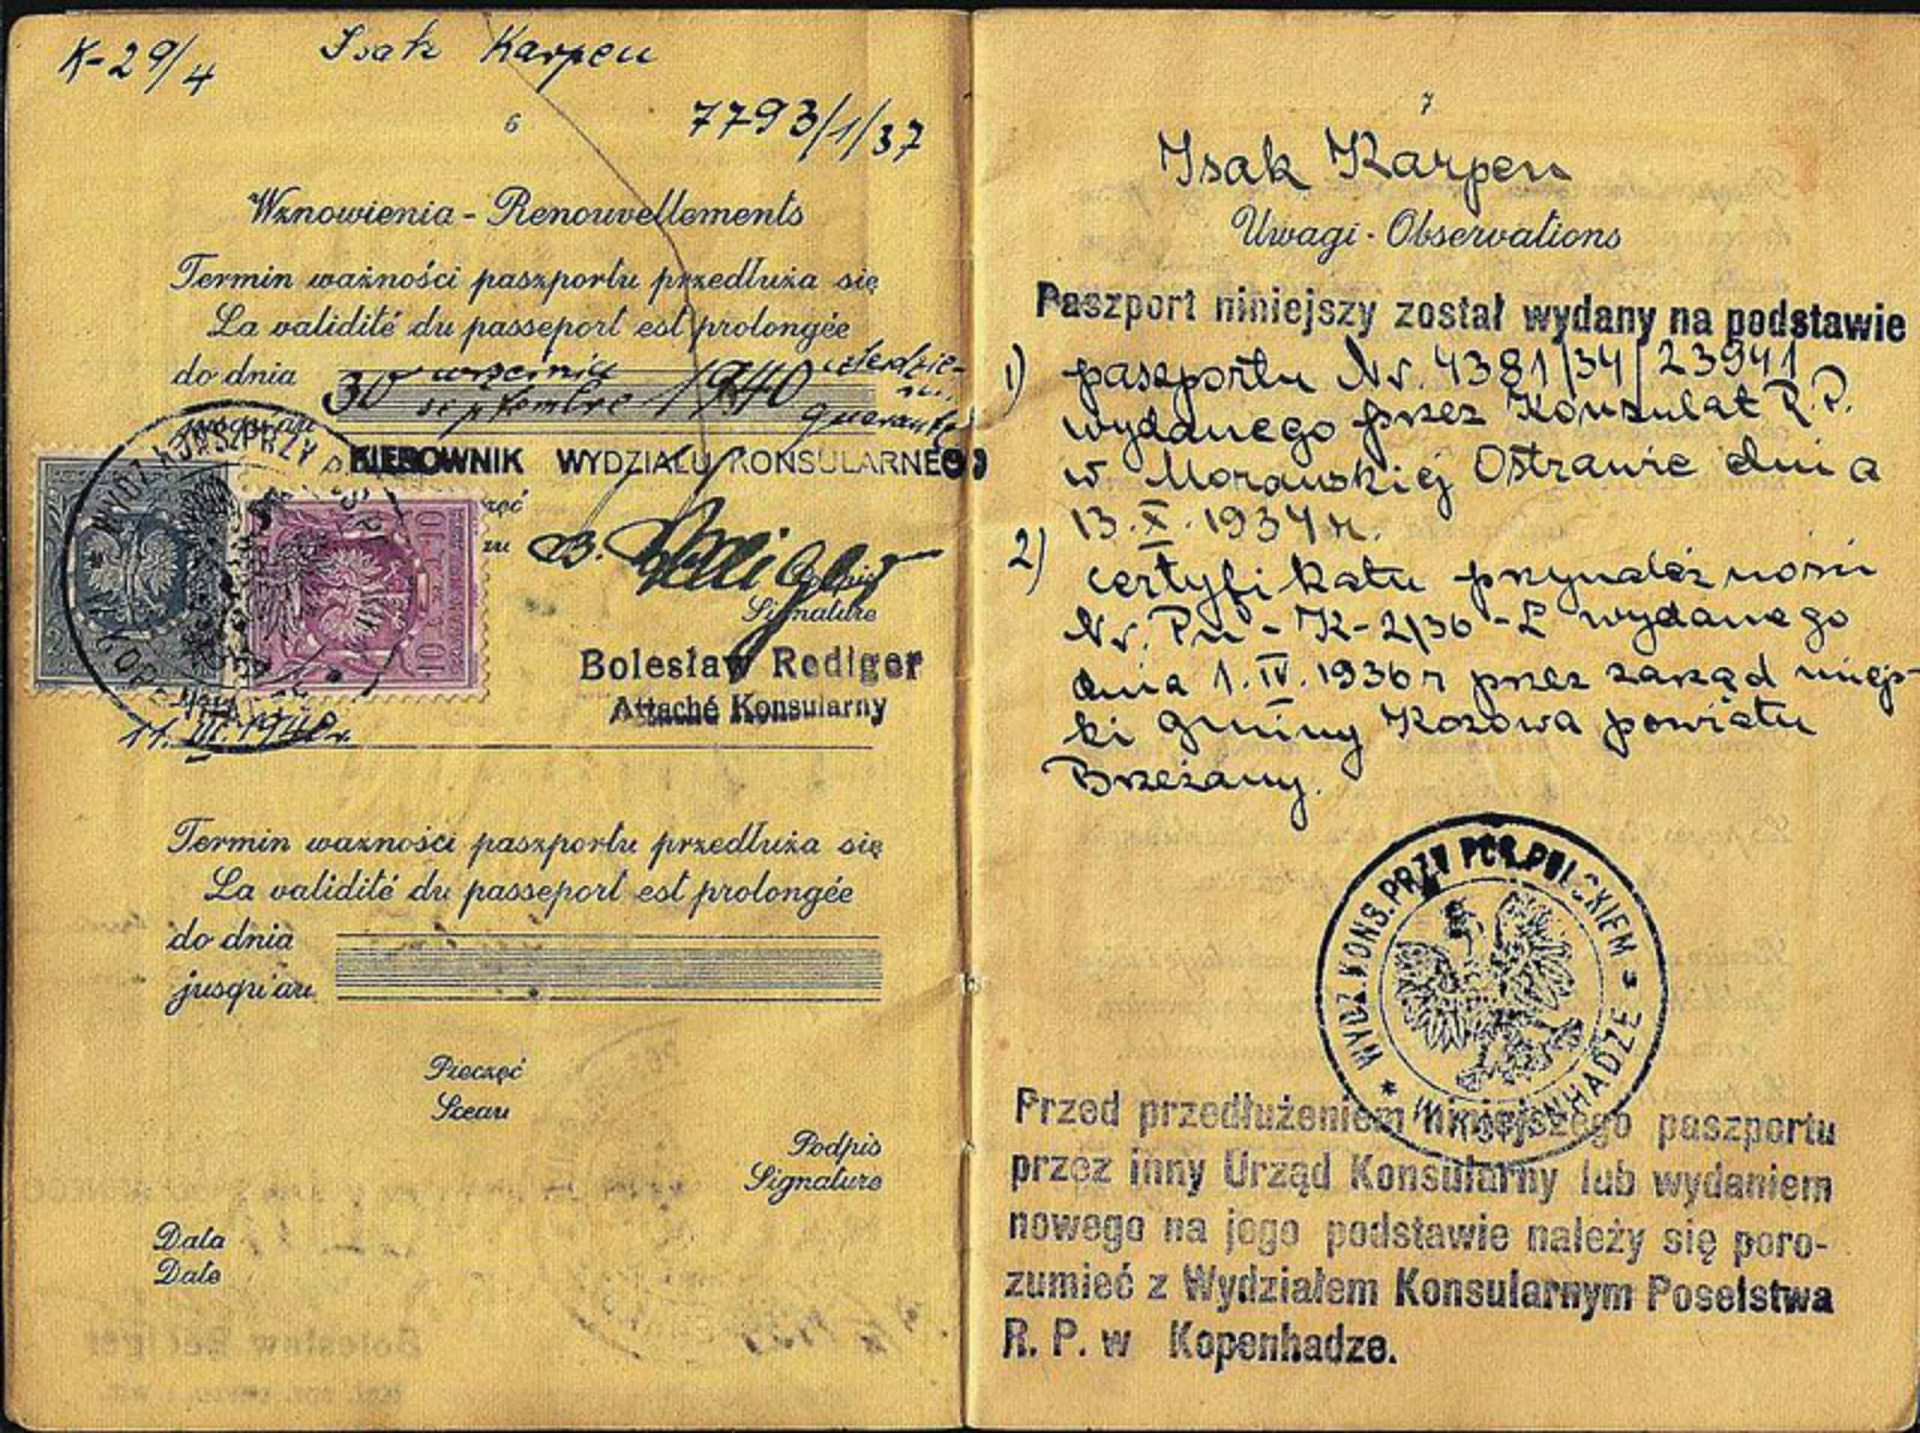 <p>On August 29, 1943, the Danish government was officially dissolved by the Germans and martial law was imposed. As a result, Denmark was now fully subjected to occupation rule. In October, the Germans made the decision to evacuate all Jews from Denmark. Pictured is a Polish passport that was utilized in Denmark until March 1940. The Jewish owner managed to escape to Sweden in 1943.</p><p>You may also like:<a href="https://www.starsinsider.com/n/493714?utm_source=msn.com&utm_medium=display&utm_campaign=referral_description&utm_content=656672en-my"> Bad beauty habits we all need to break</a></p>